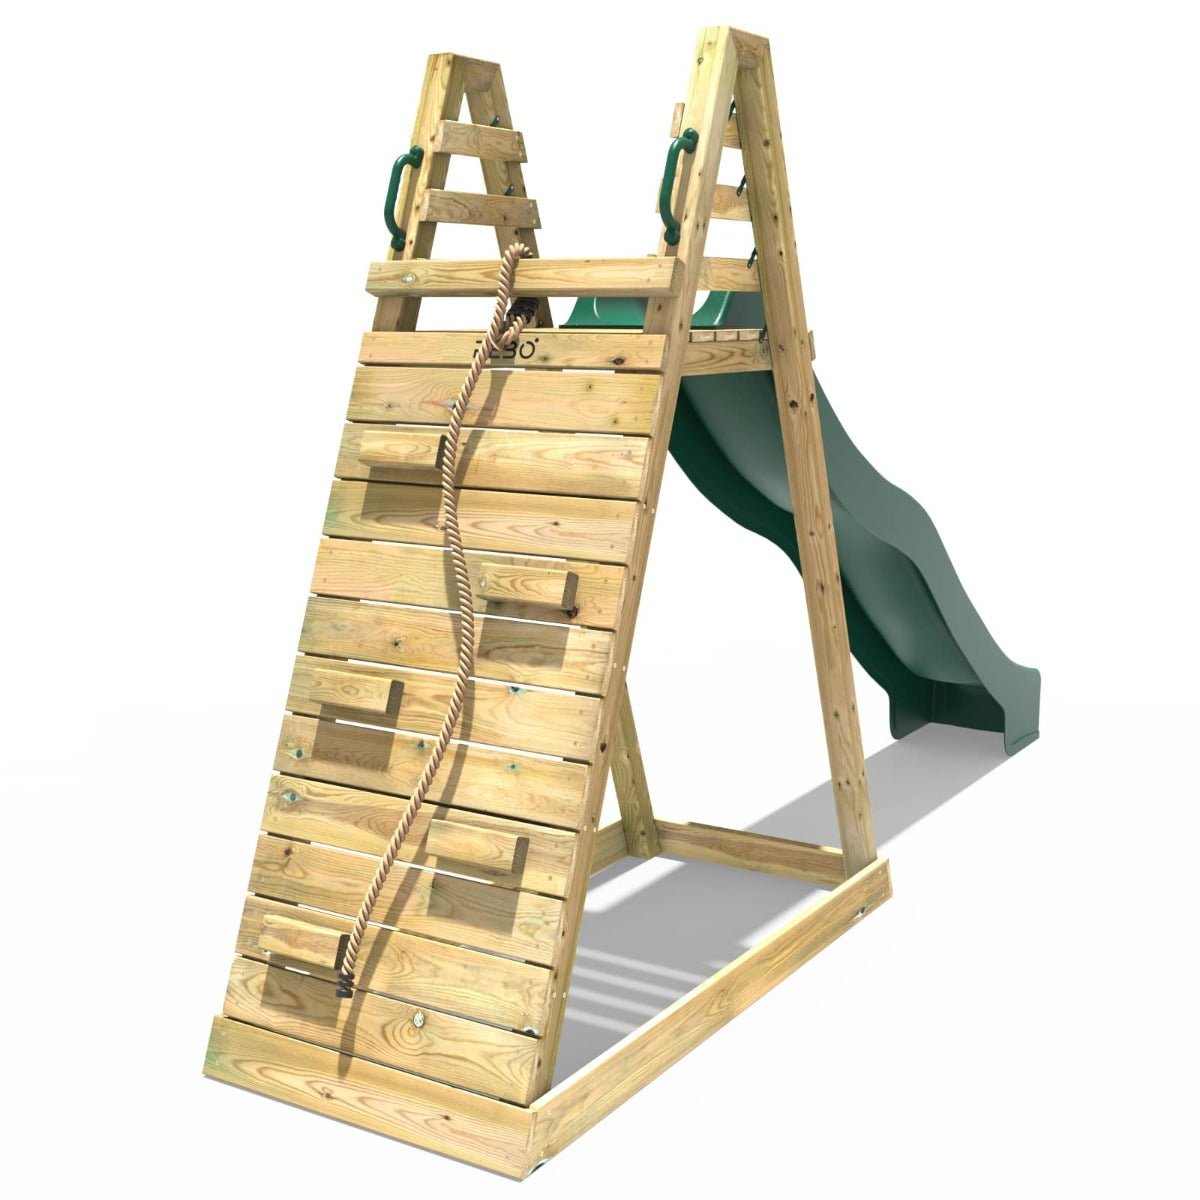 Rebo Wooden Free Standing Slide with 10ft Water Slide - with Adventure Wall